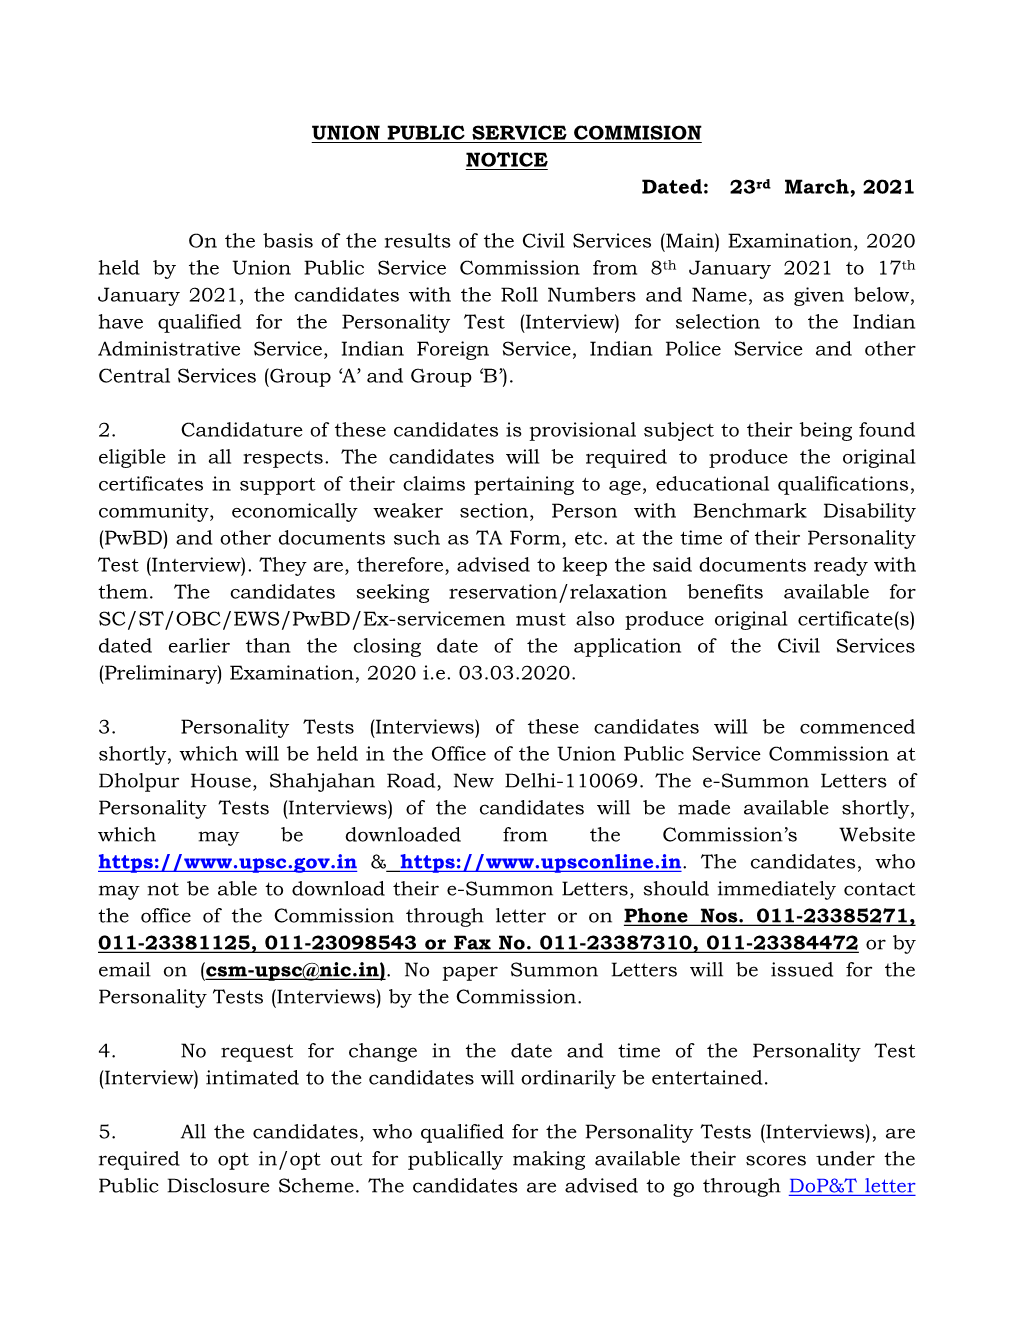 23Rd March, 2021 on the Basis of the Results of the Civil Services